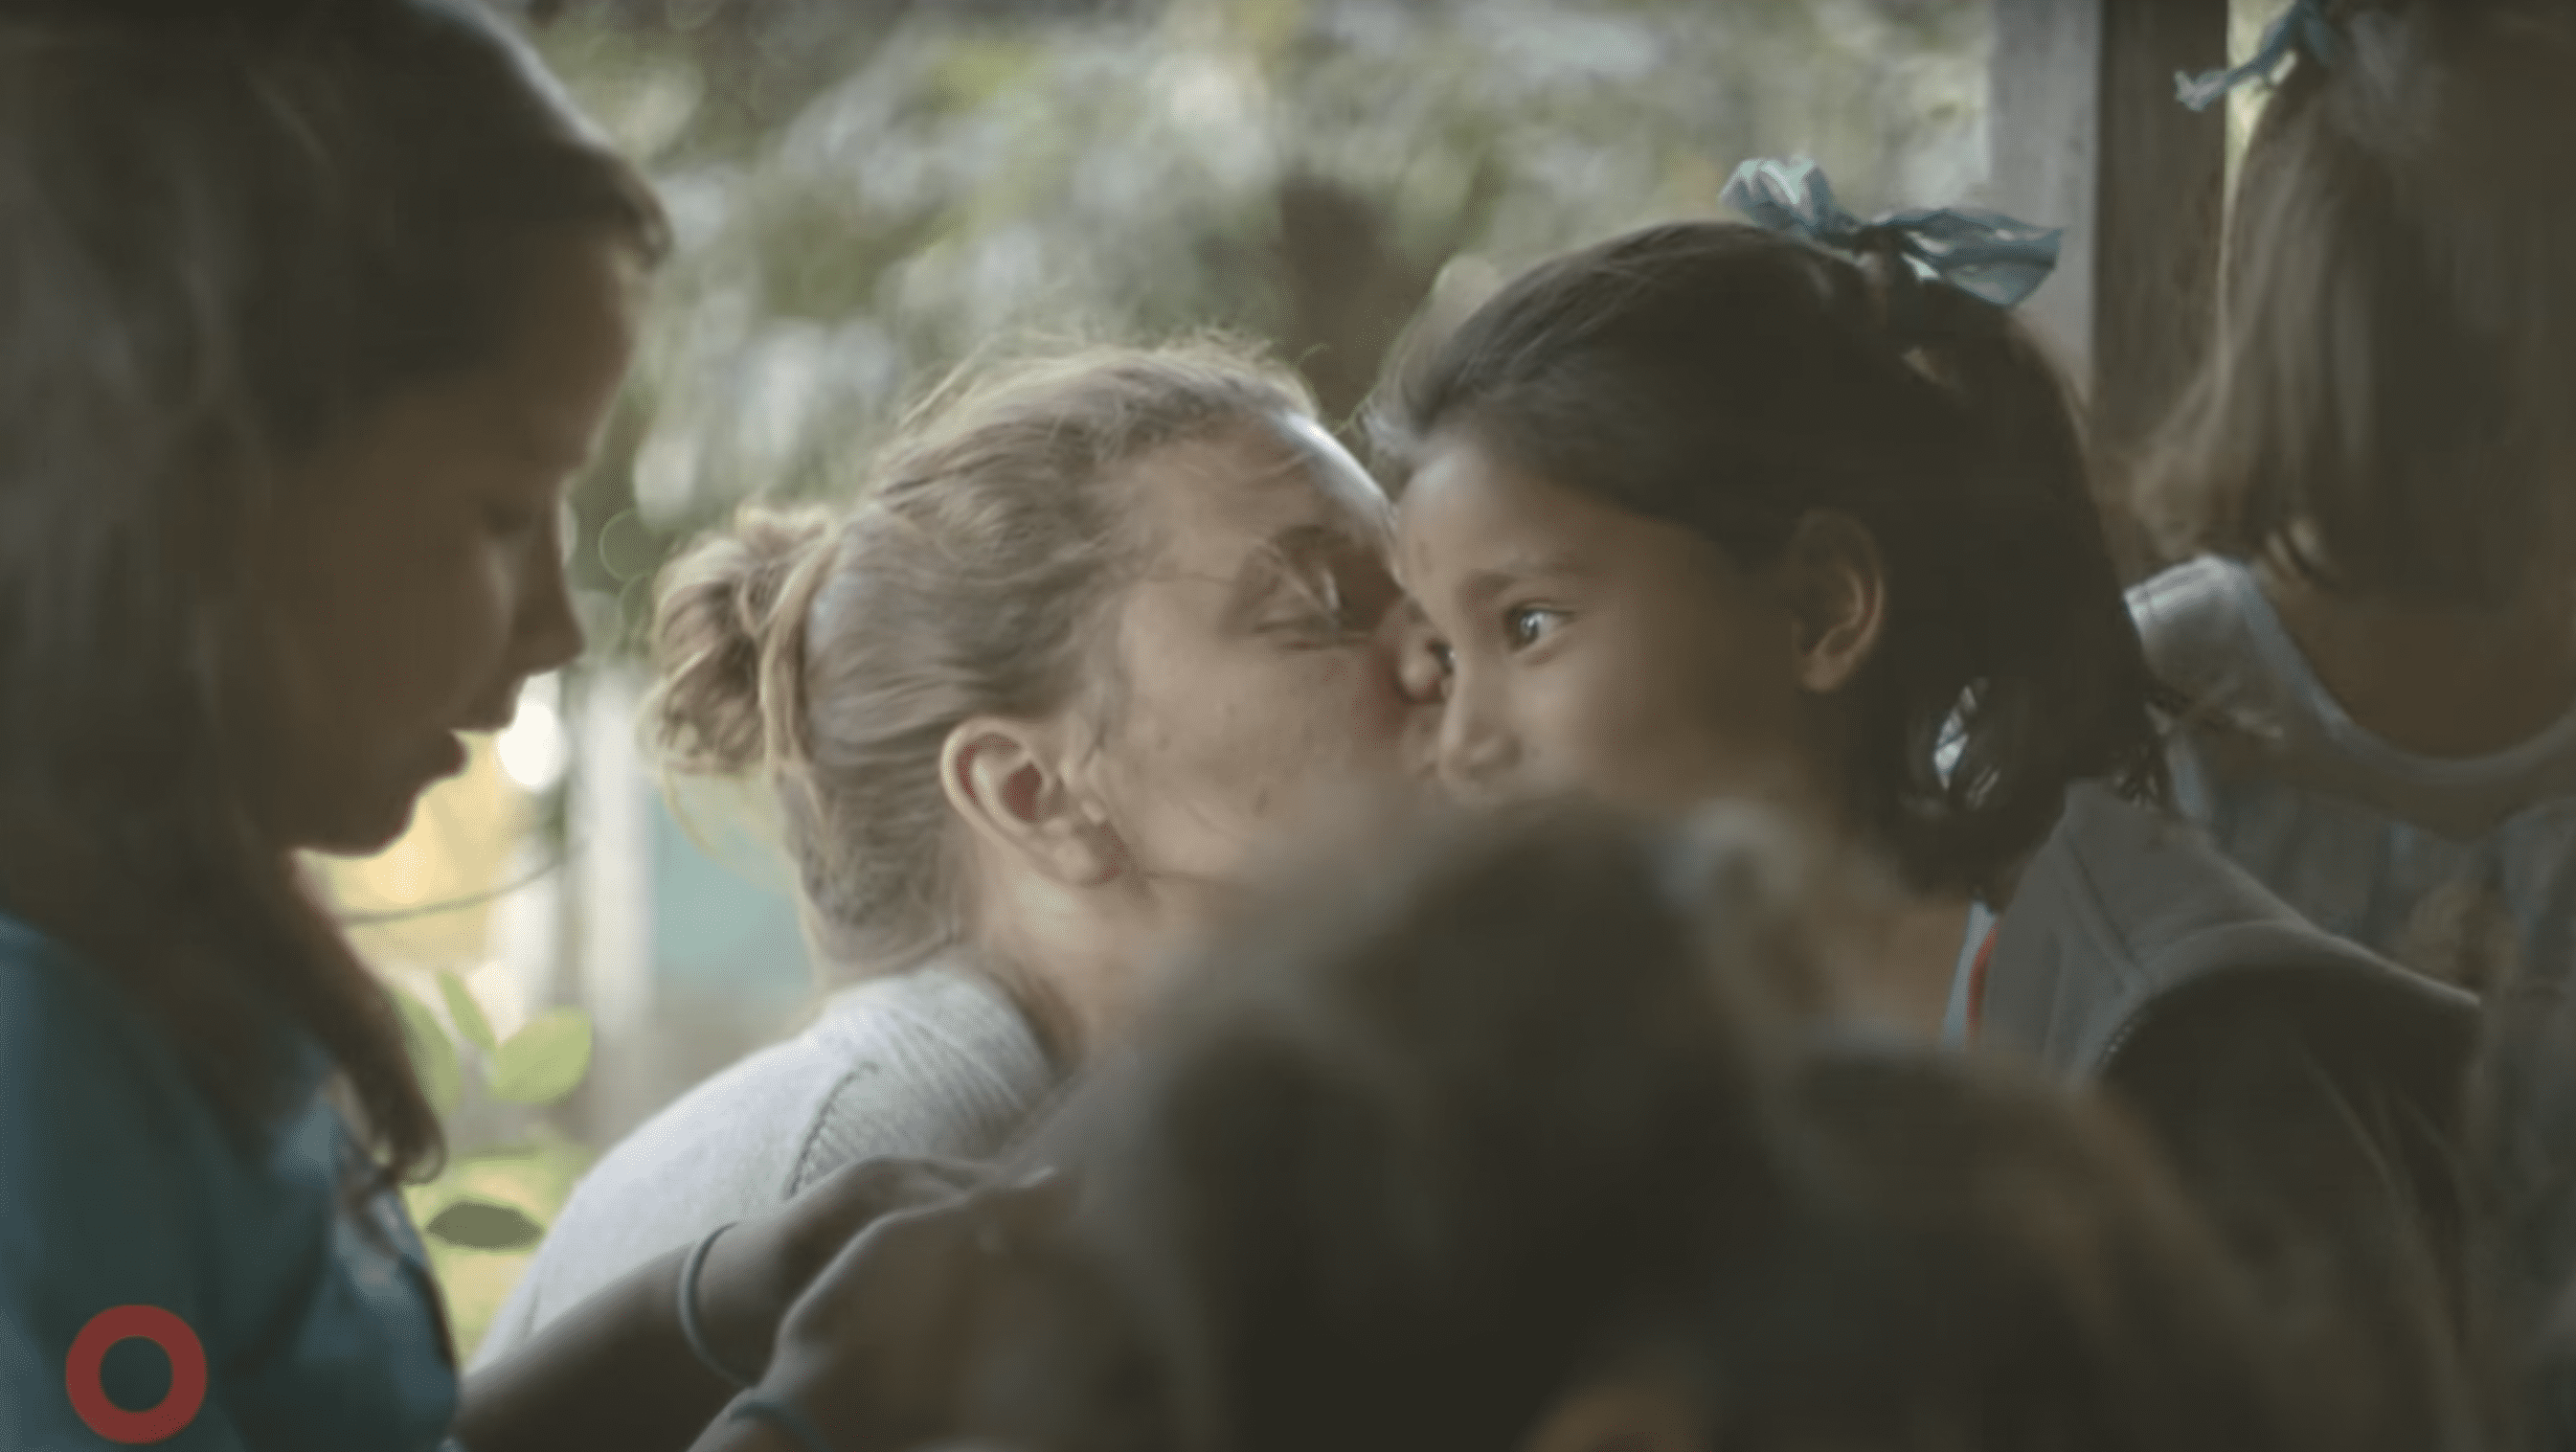 Maggie Doyne pictured kissing one of her adopted kids. | Source: YouTube.com/Global Citizen